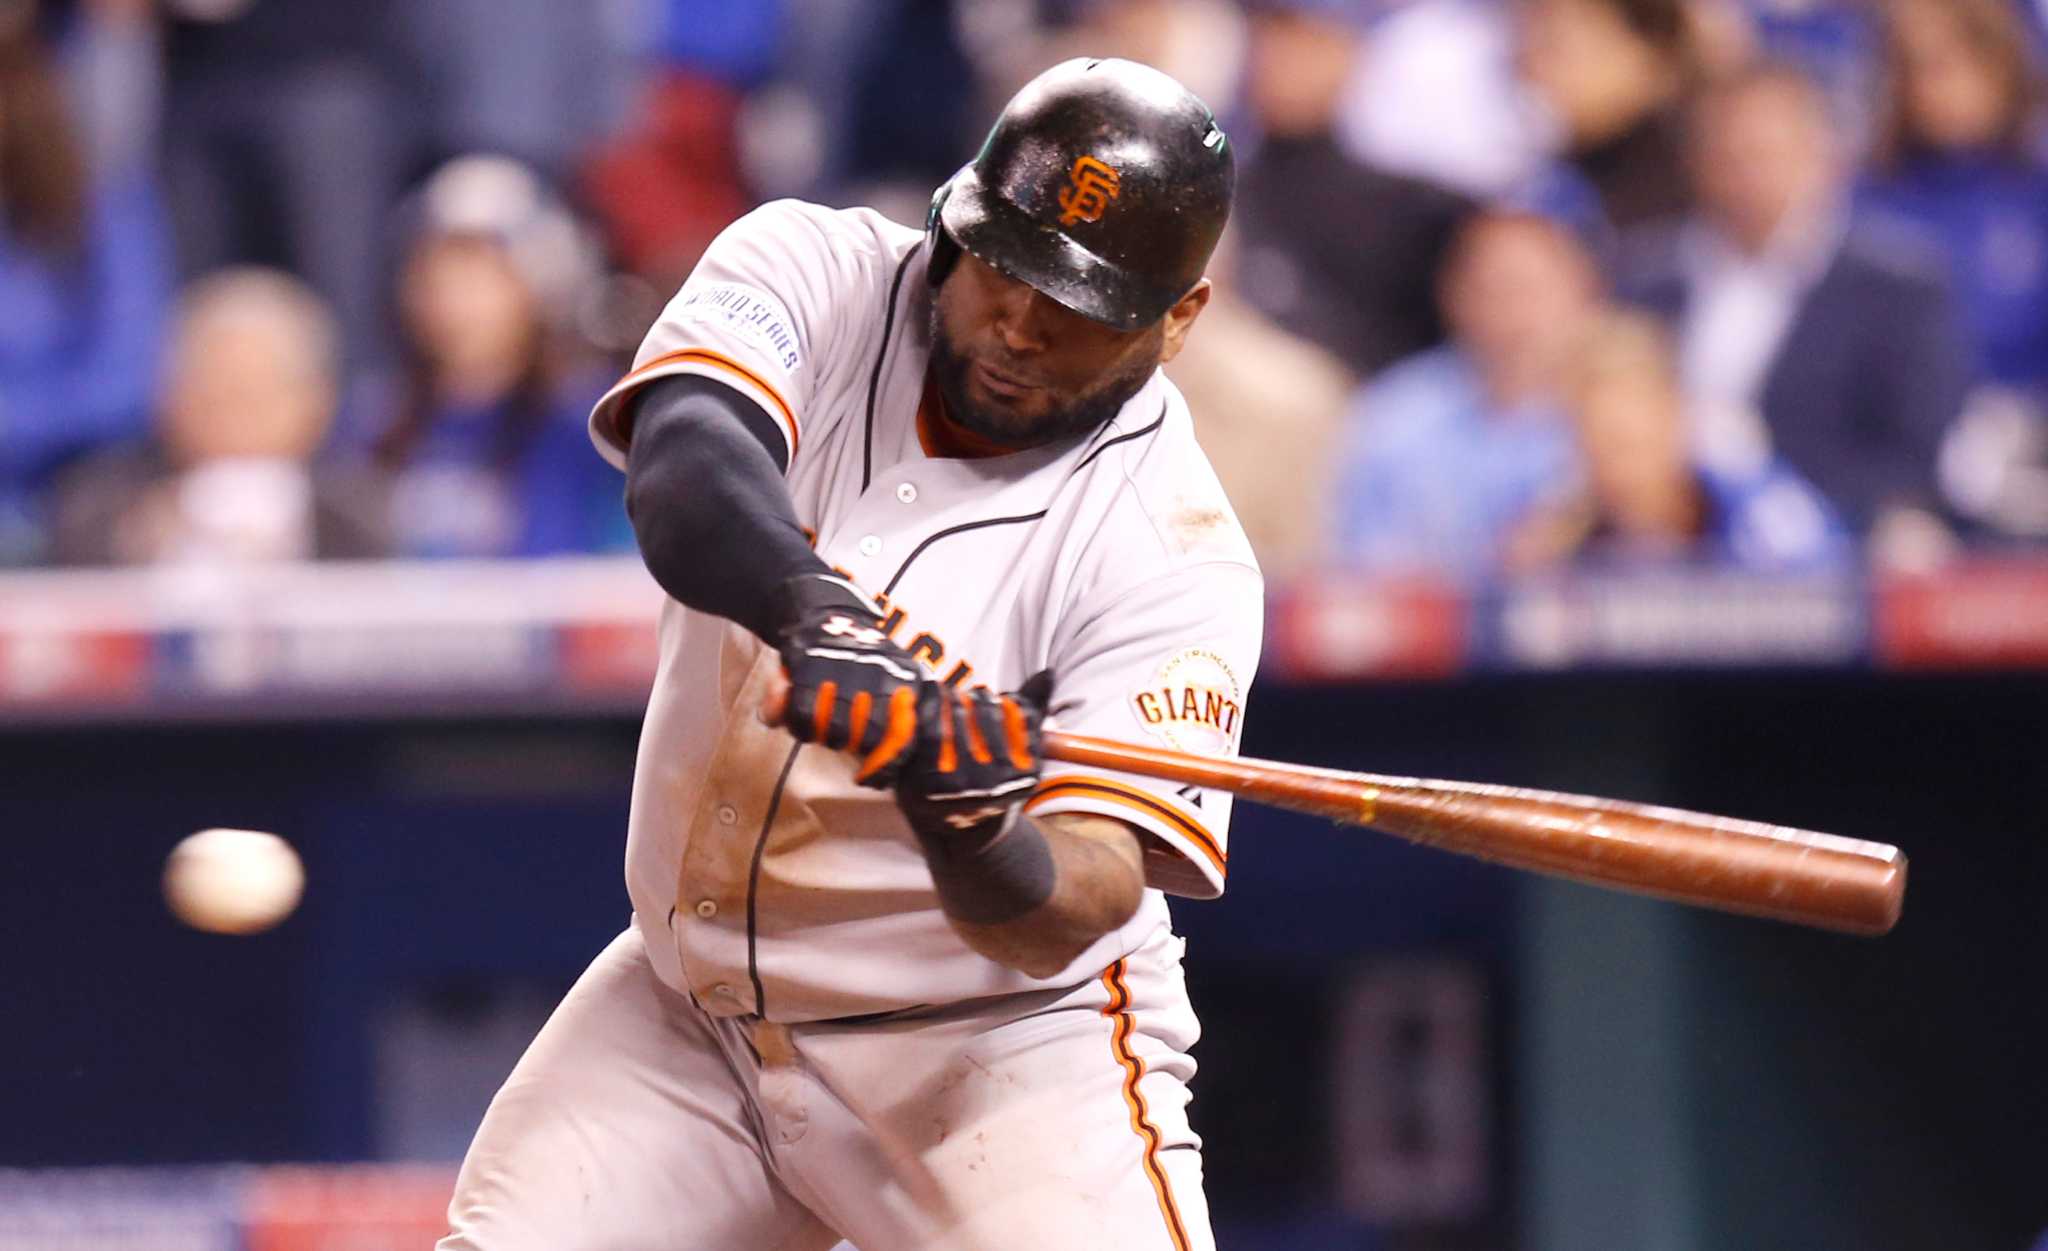 Giants feel “right in the middle” of Pablo Sandoval contract talks